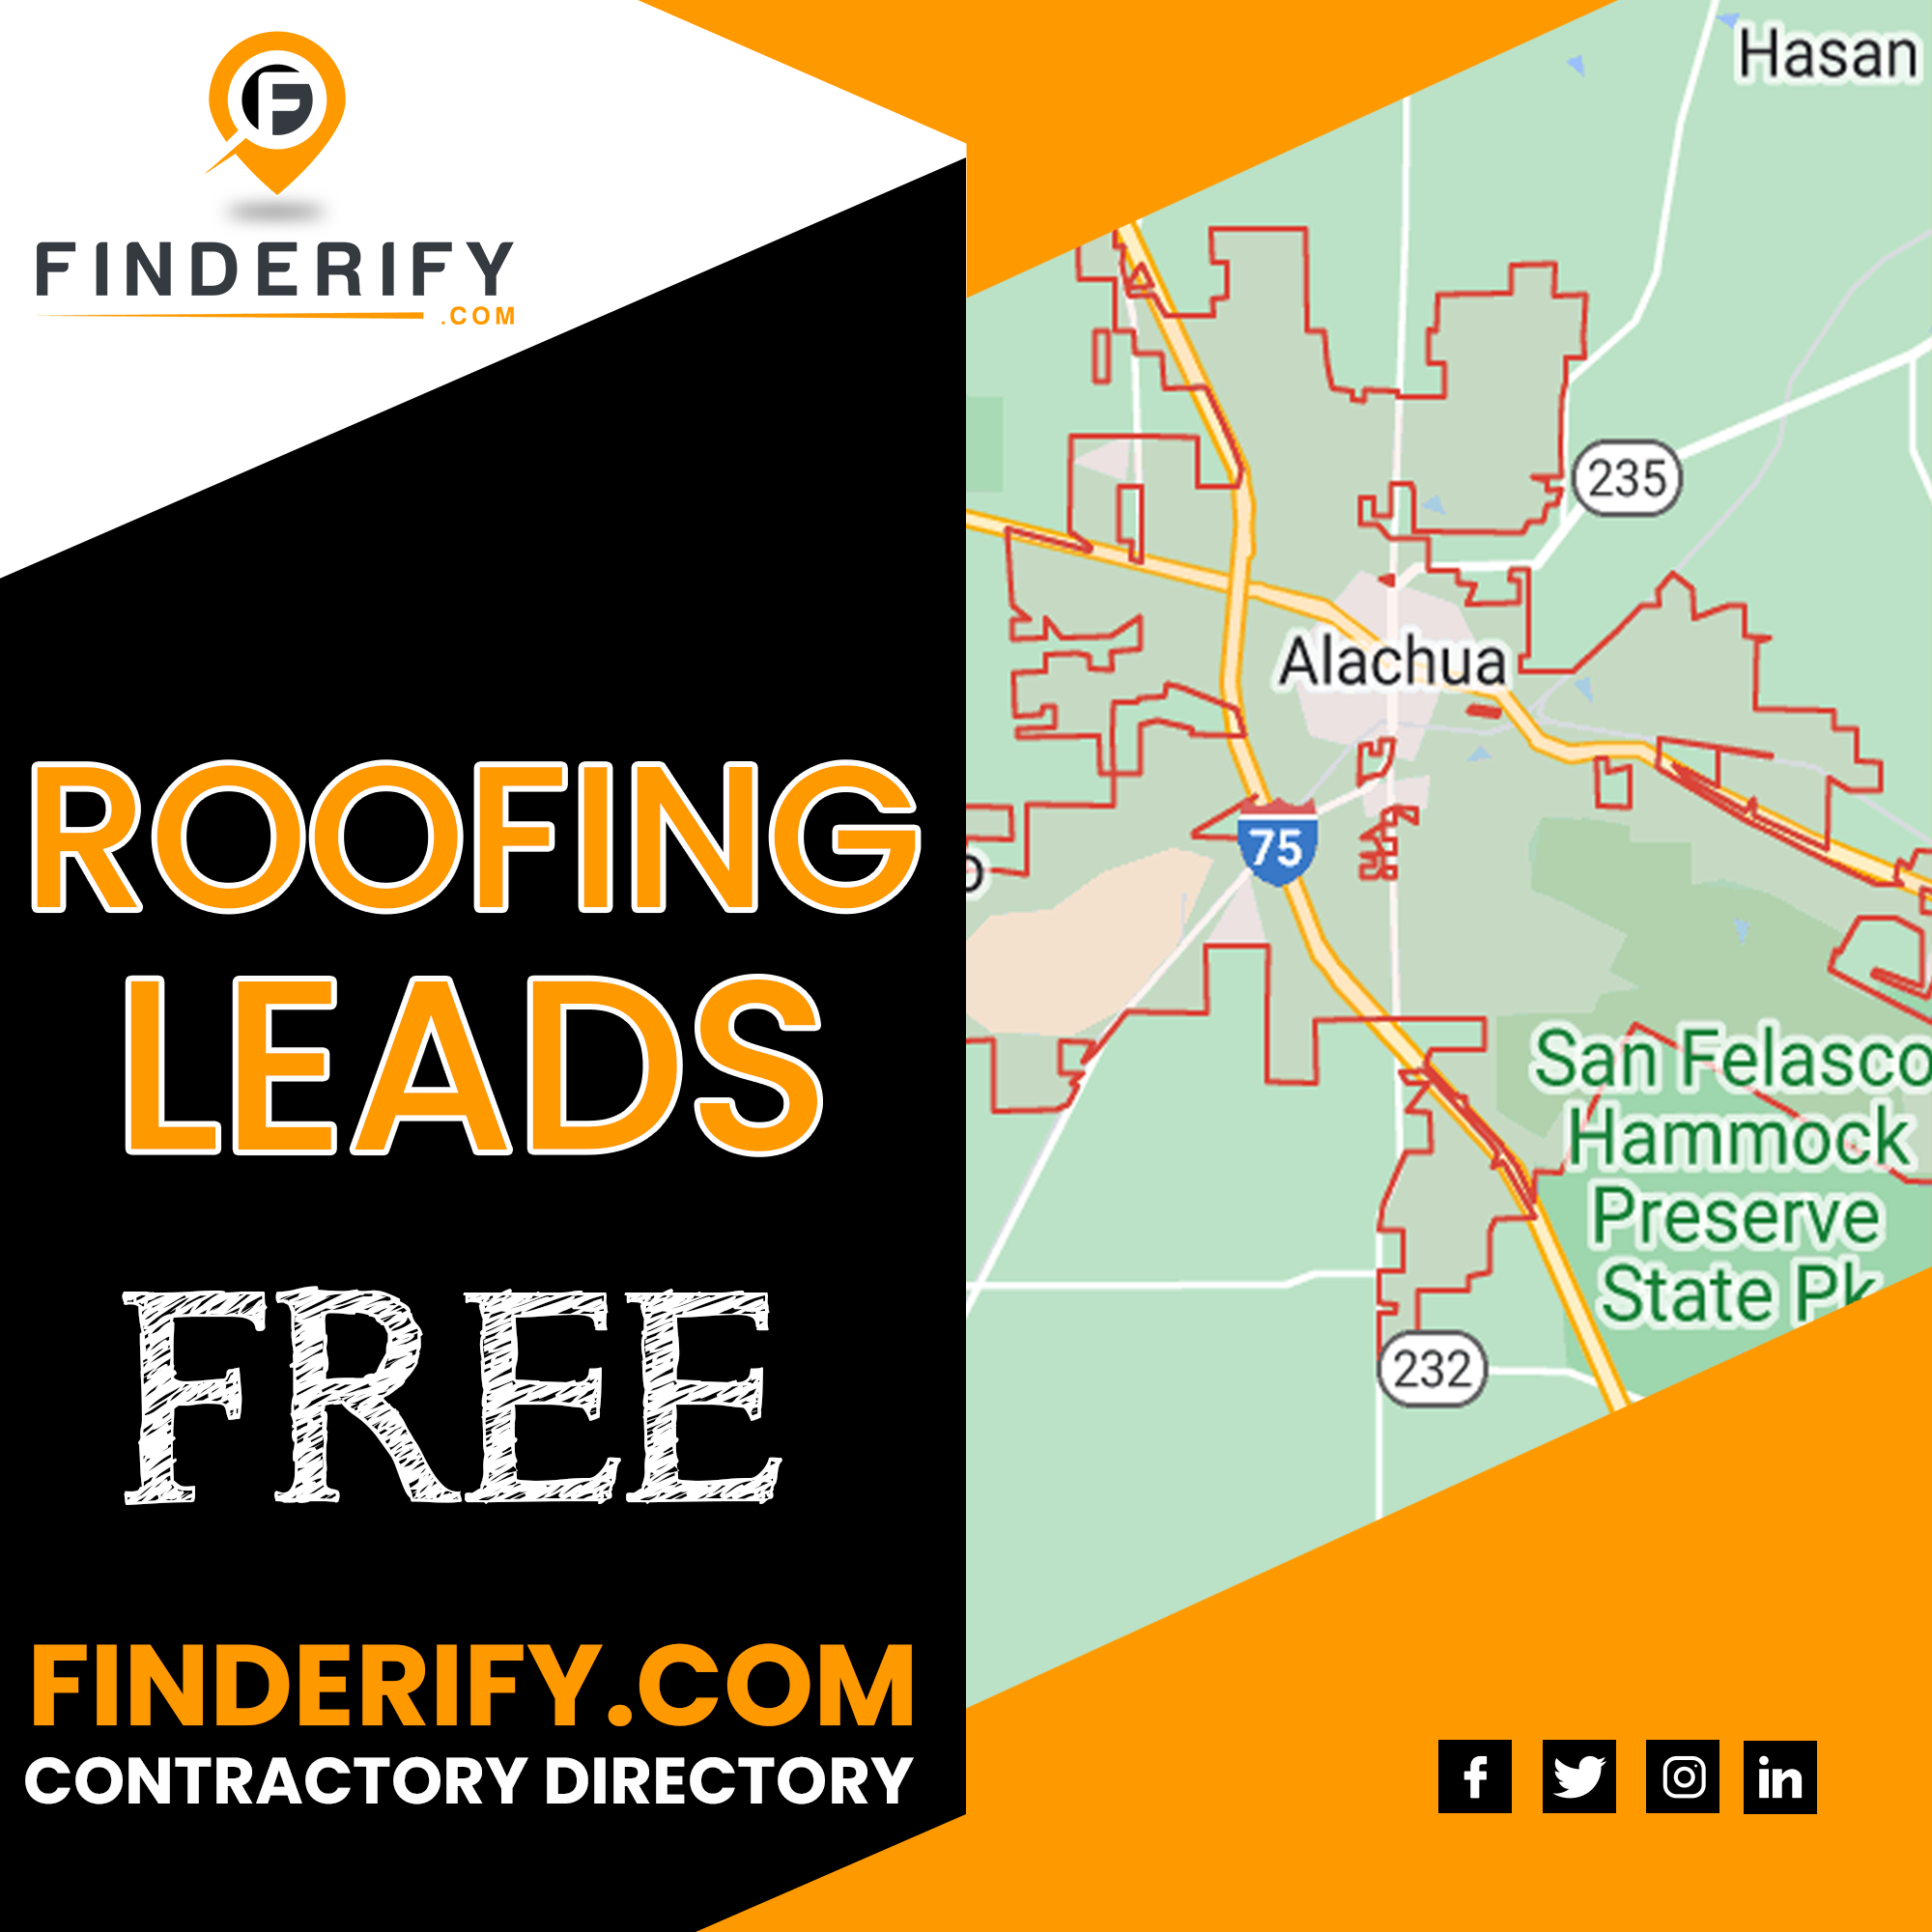 Alachua roofing leads: Find trusted contractors for repairs, replacements, and inspections.